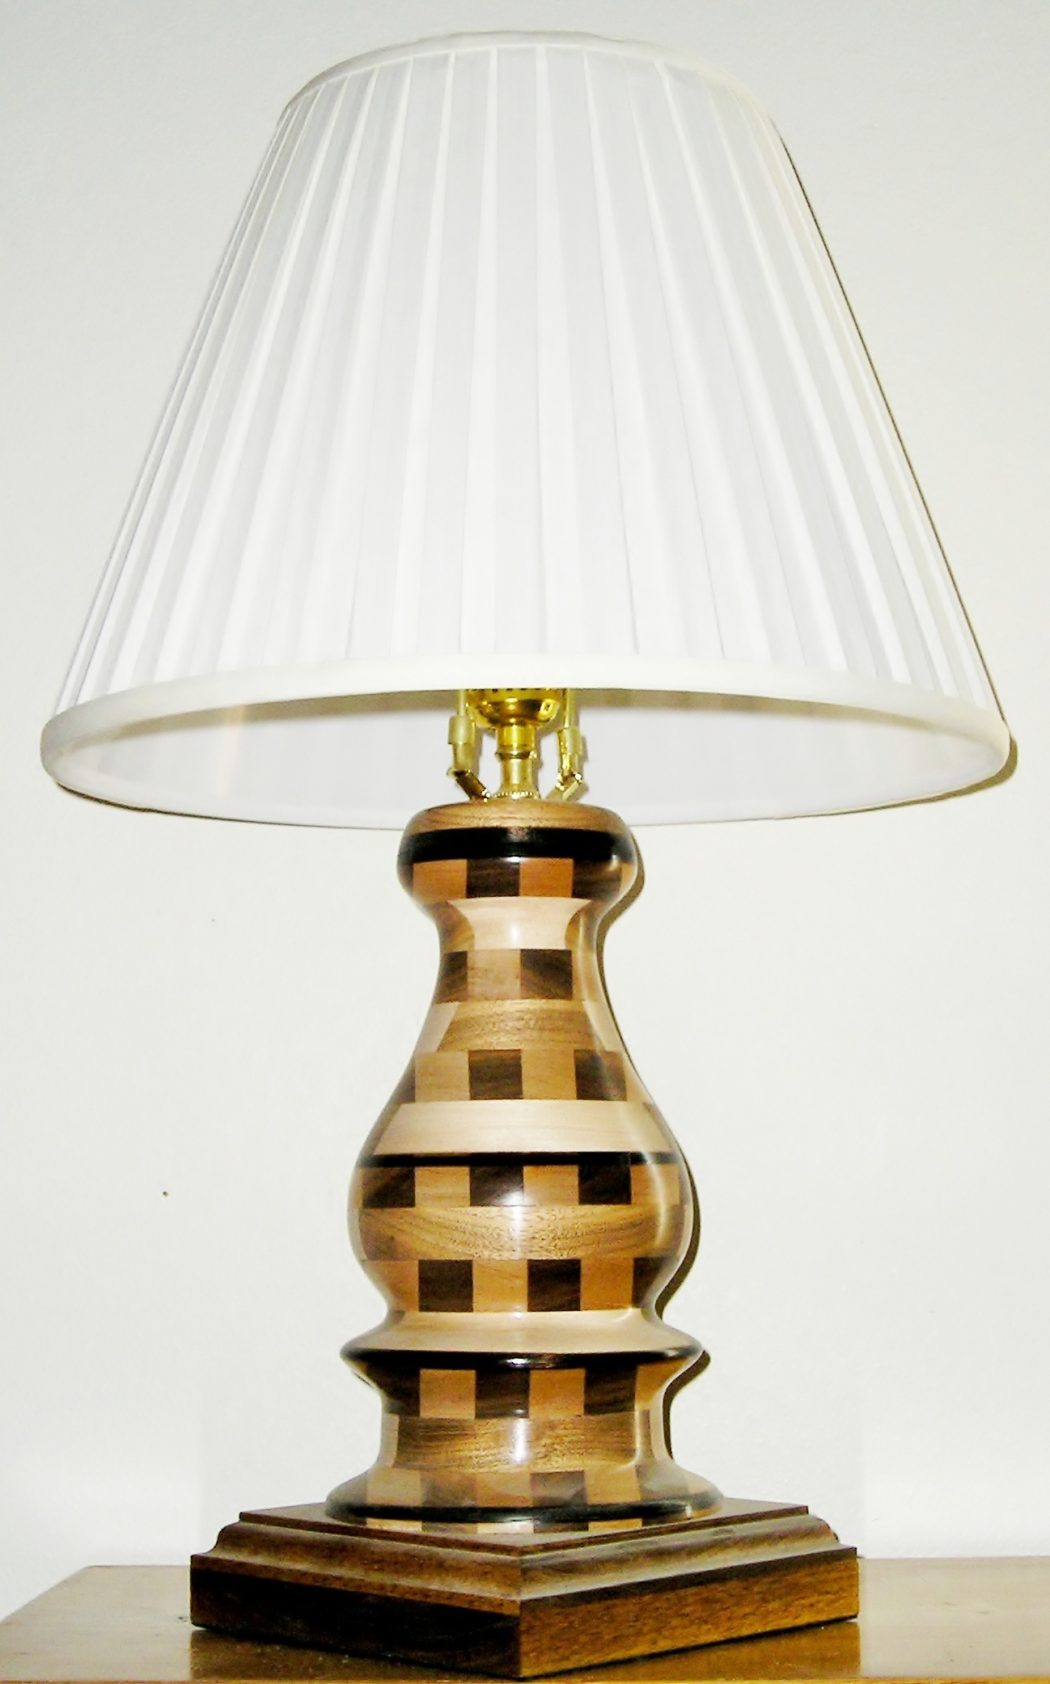 Do You Like To Have A handmade Wooden Lamp? Pouted.com